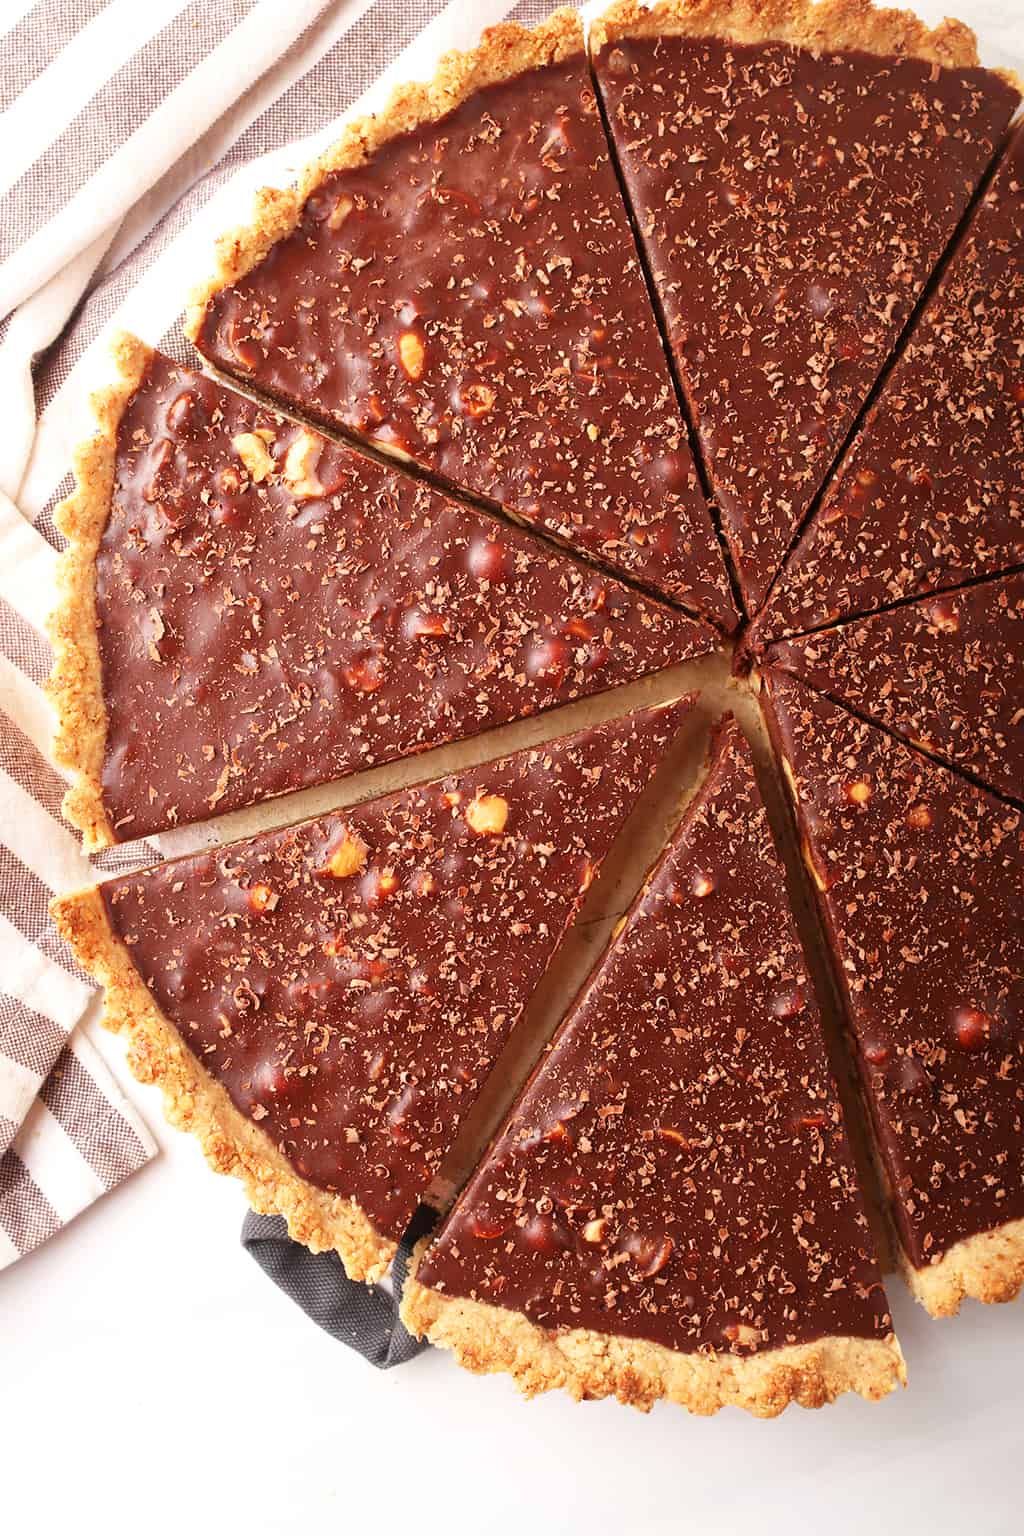 Close up of chocolate tart cut into slices.  